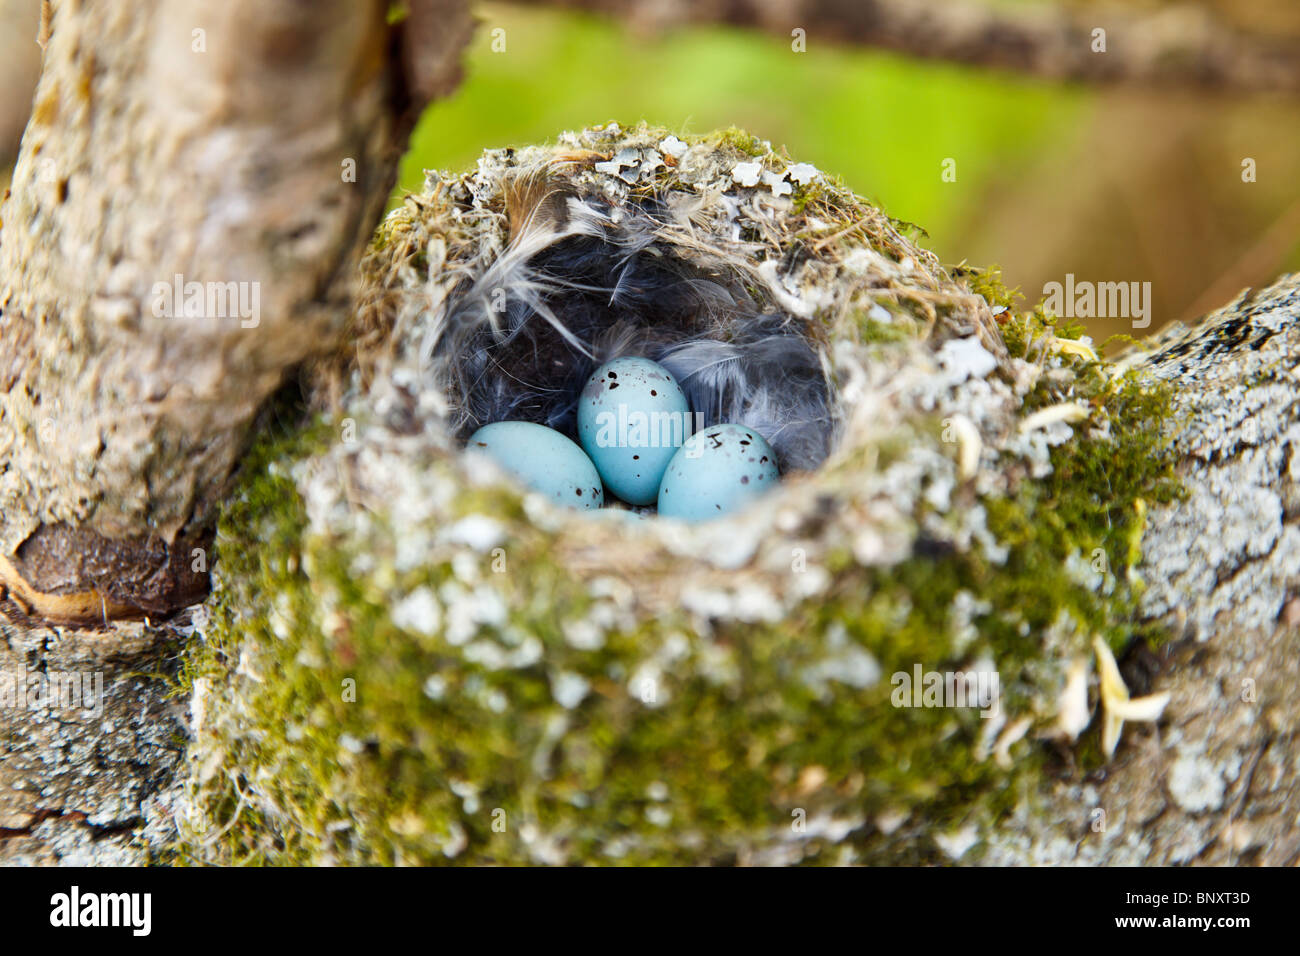 The nest of the common finch, Fringilla coelebs, with eggs. Stock Photo